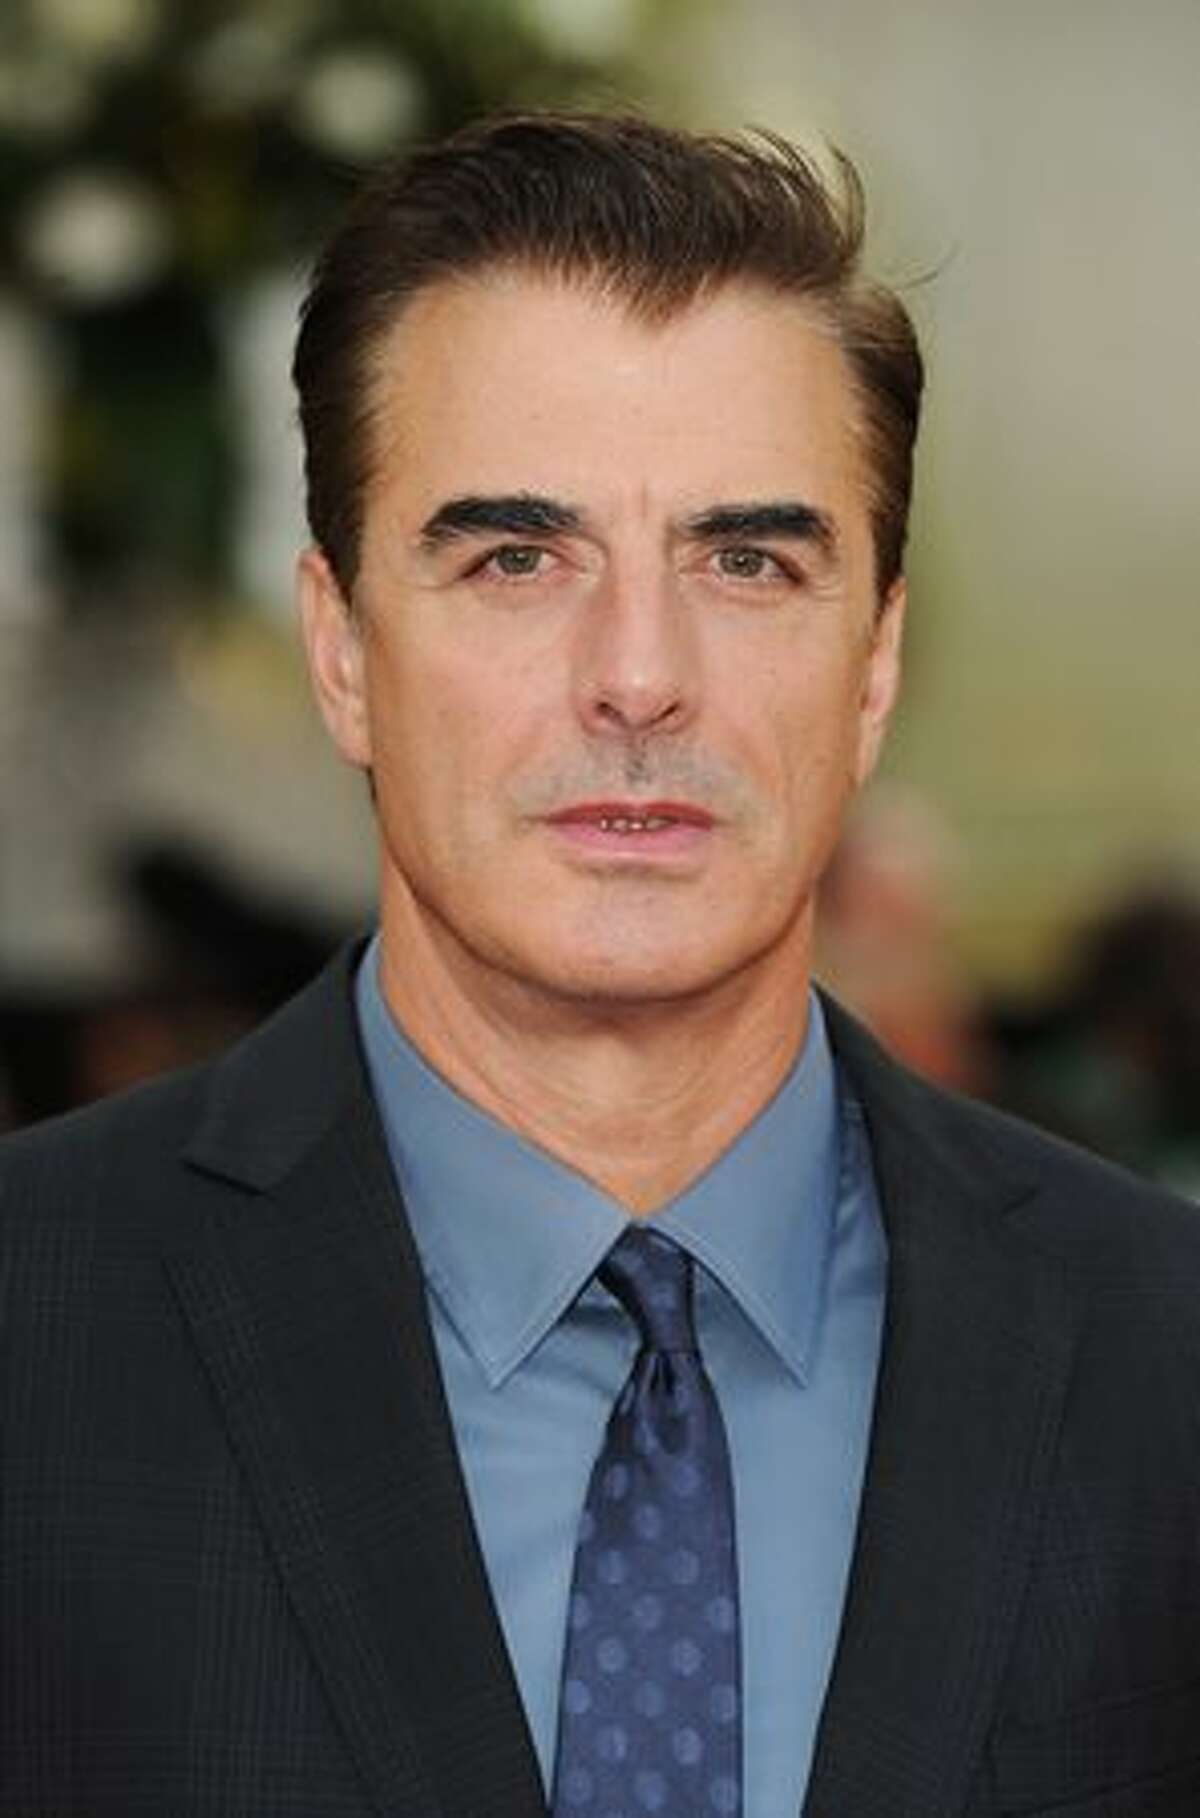 Chris Noth attends the UK premiere of Sex And The City 2 at Odeon Leicester Square in London.